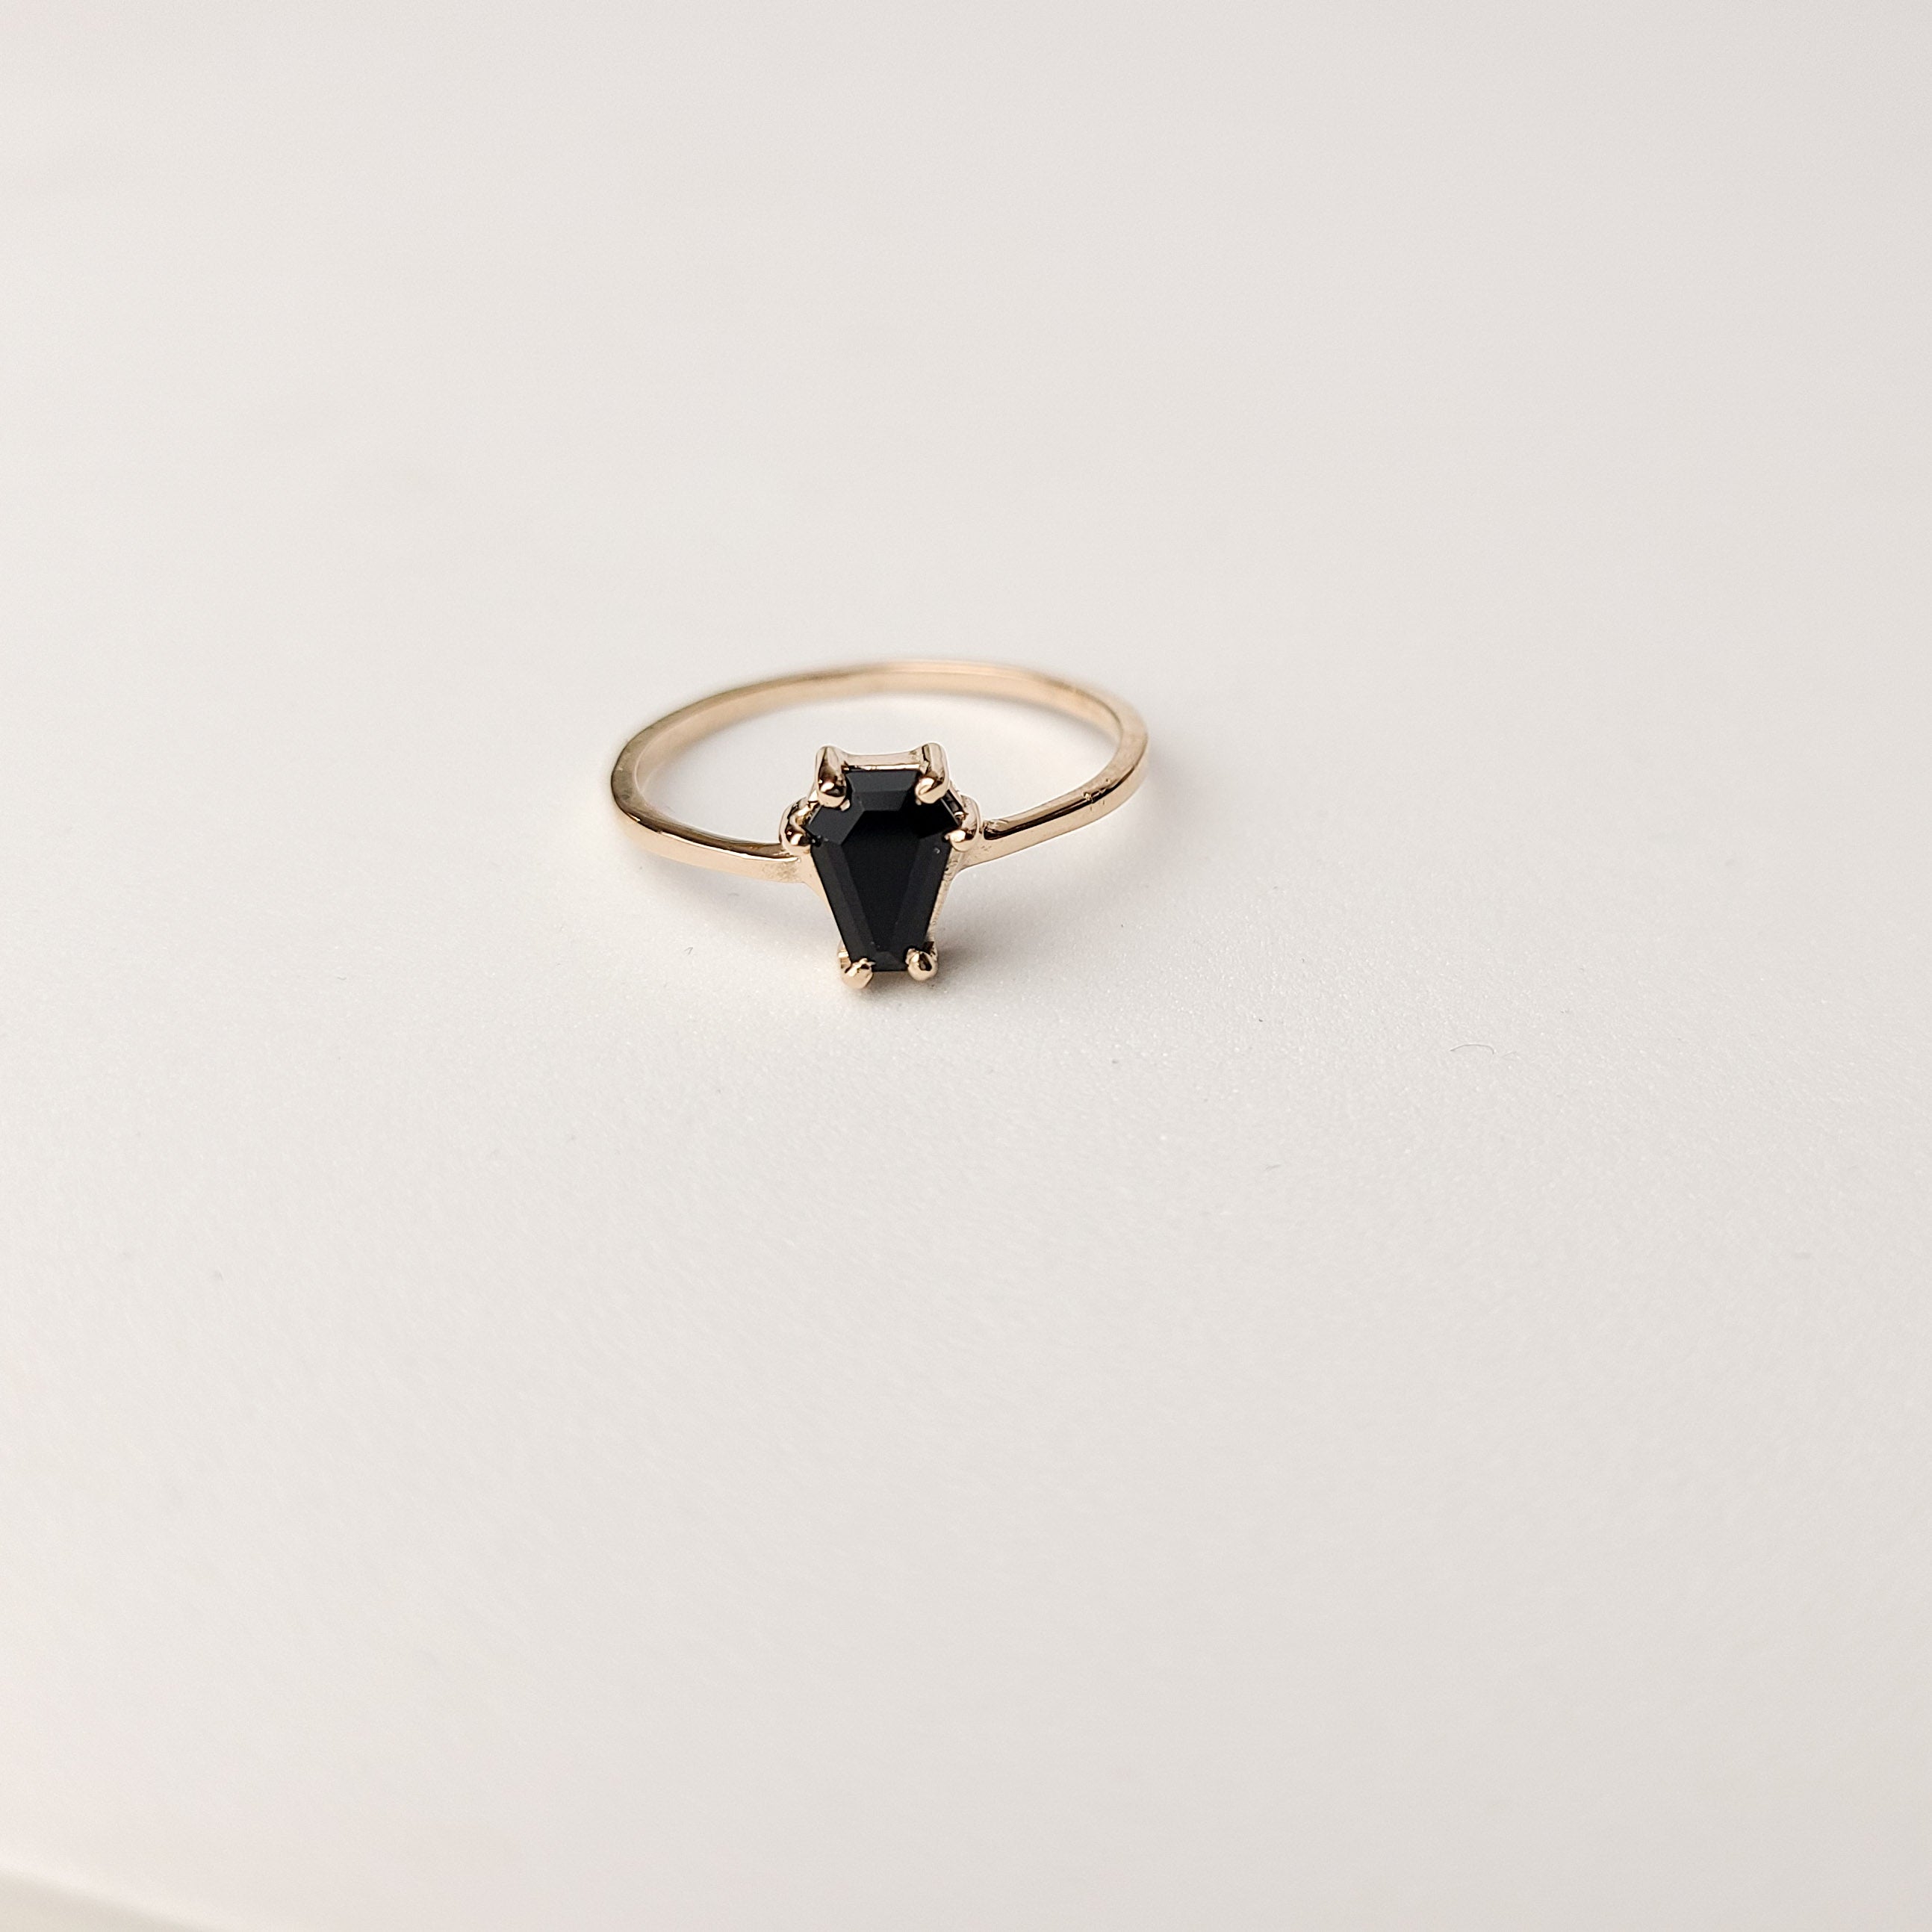 10K 14K Rose Gold Small Coffin Ring